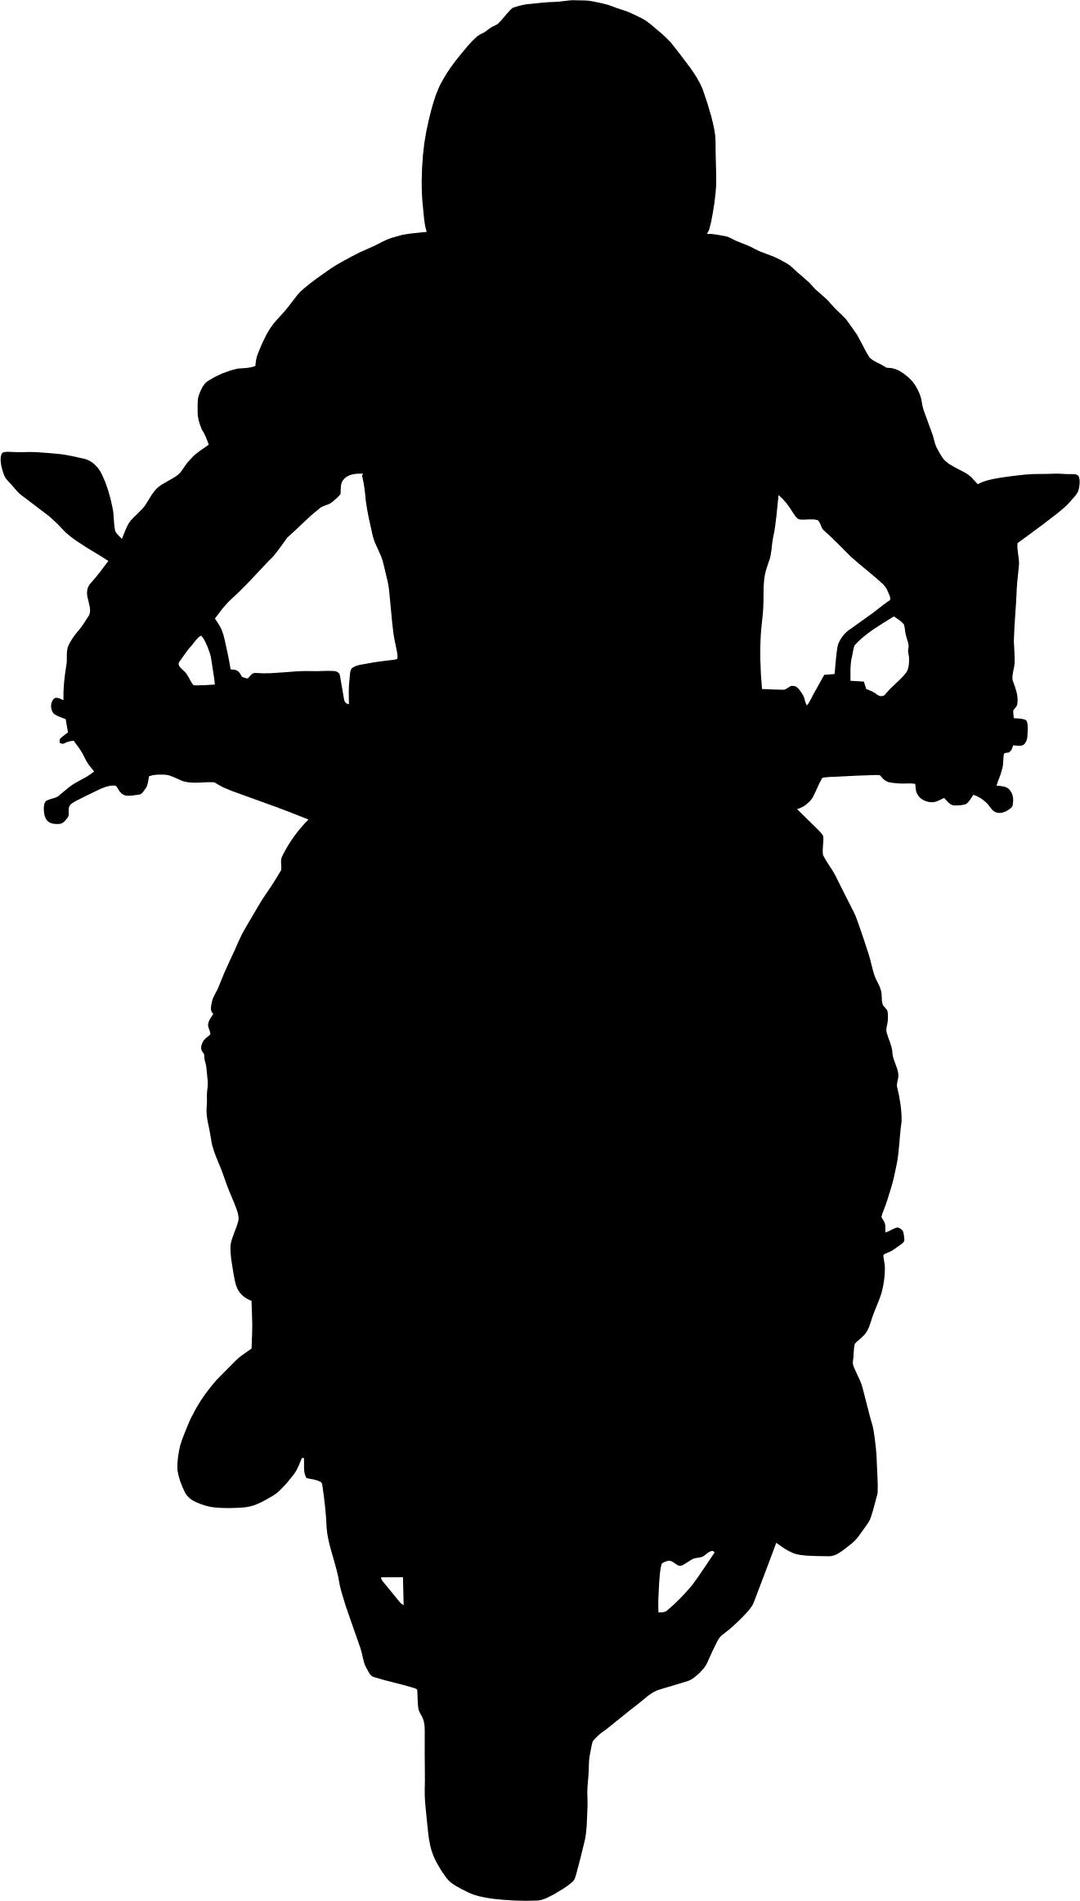 Man On Motorcycle Silhouette png transparent